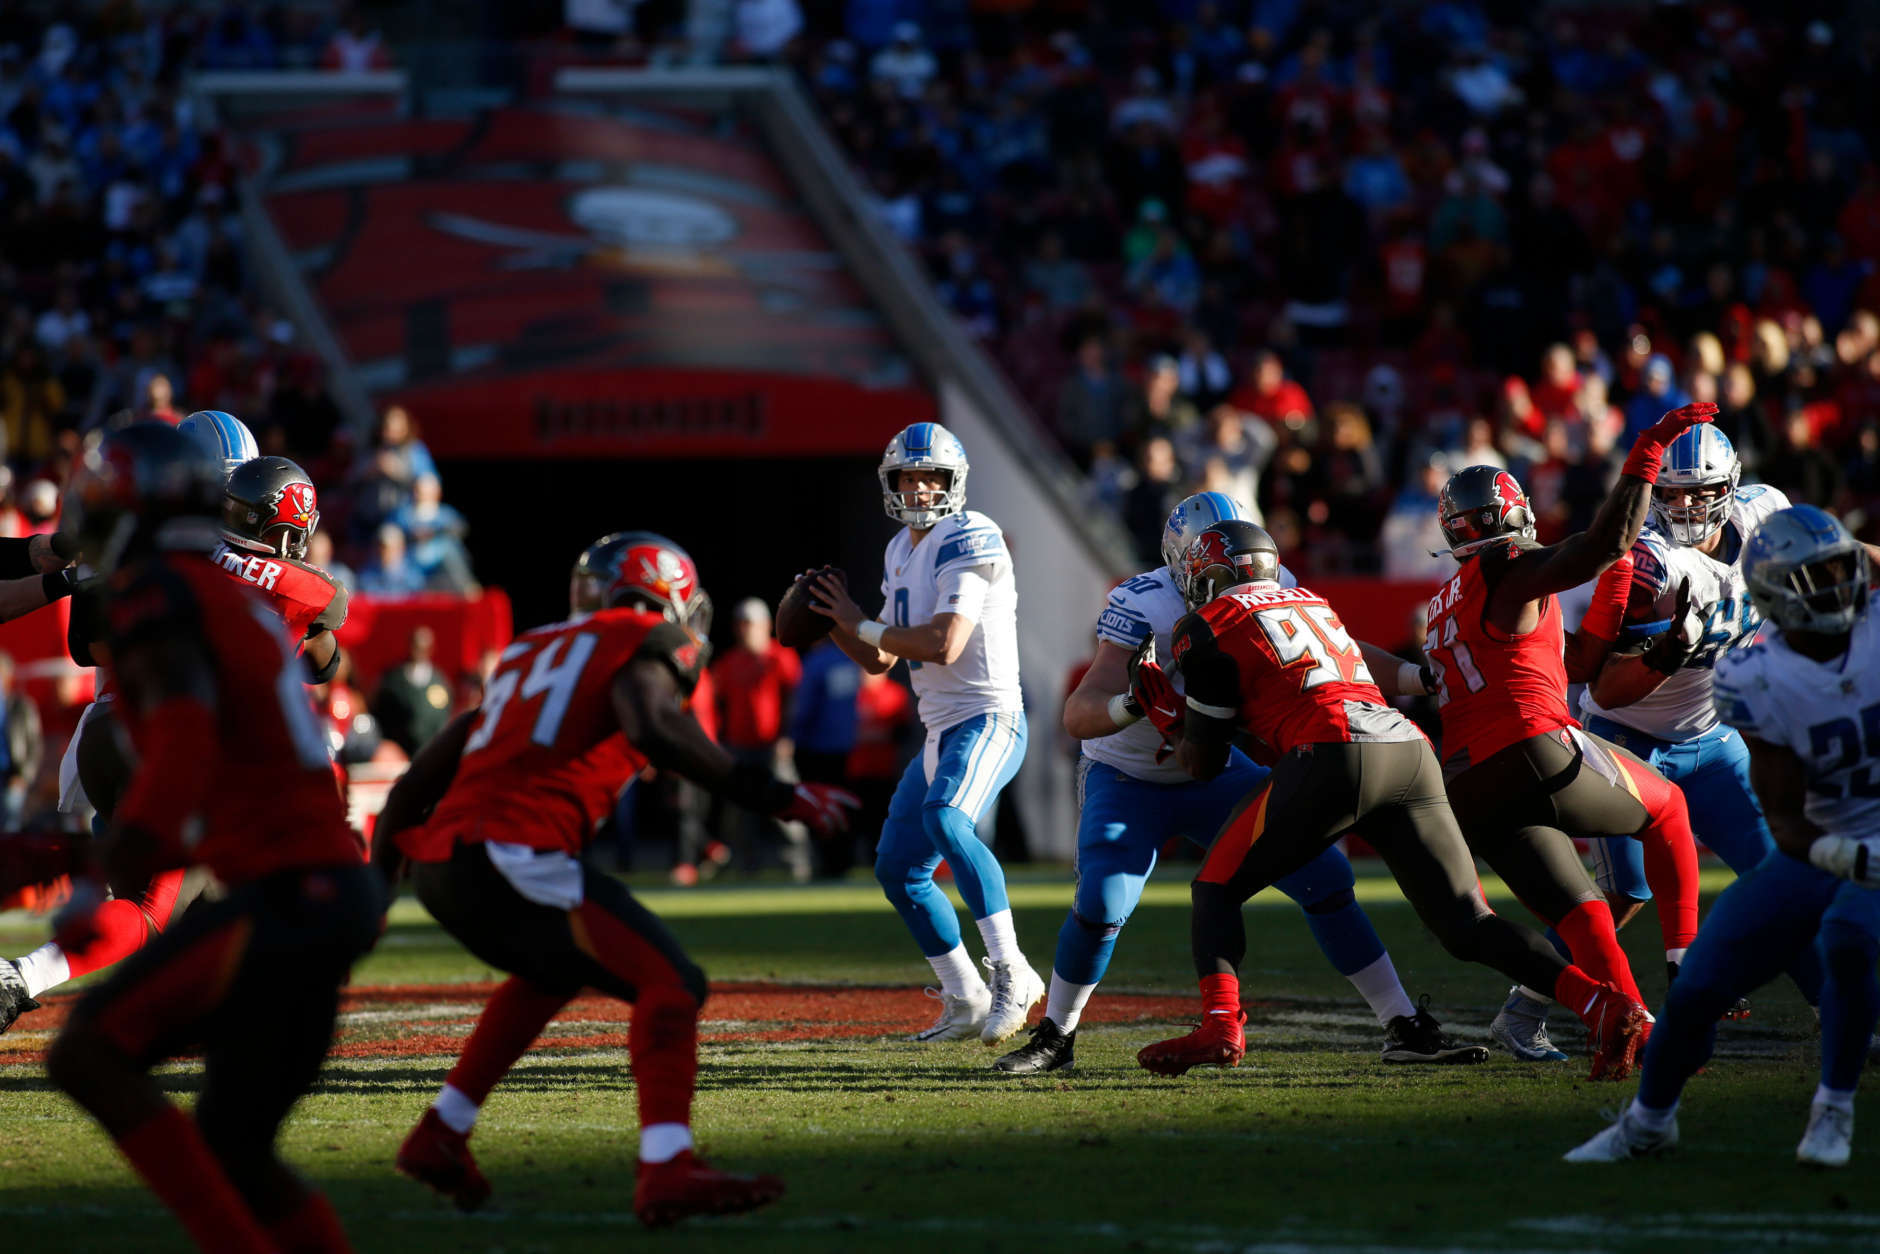 TAMPA, FL - DECEMBER 10:  Quarterback Matthew Stafford #9 of the Detroit Lions looks for a receiver during the fourth quarter of an NFL football game against the Tampa Bay Buccaneers on December 10, 2017 at Raymond James Stadium in Tampa, Florida. (Photo by Brian Blanco/Getty Images)